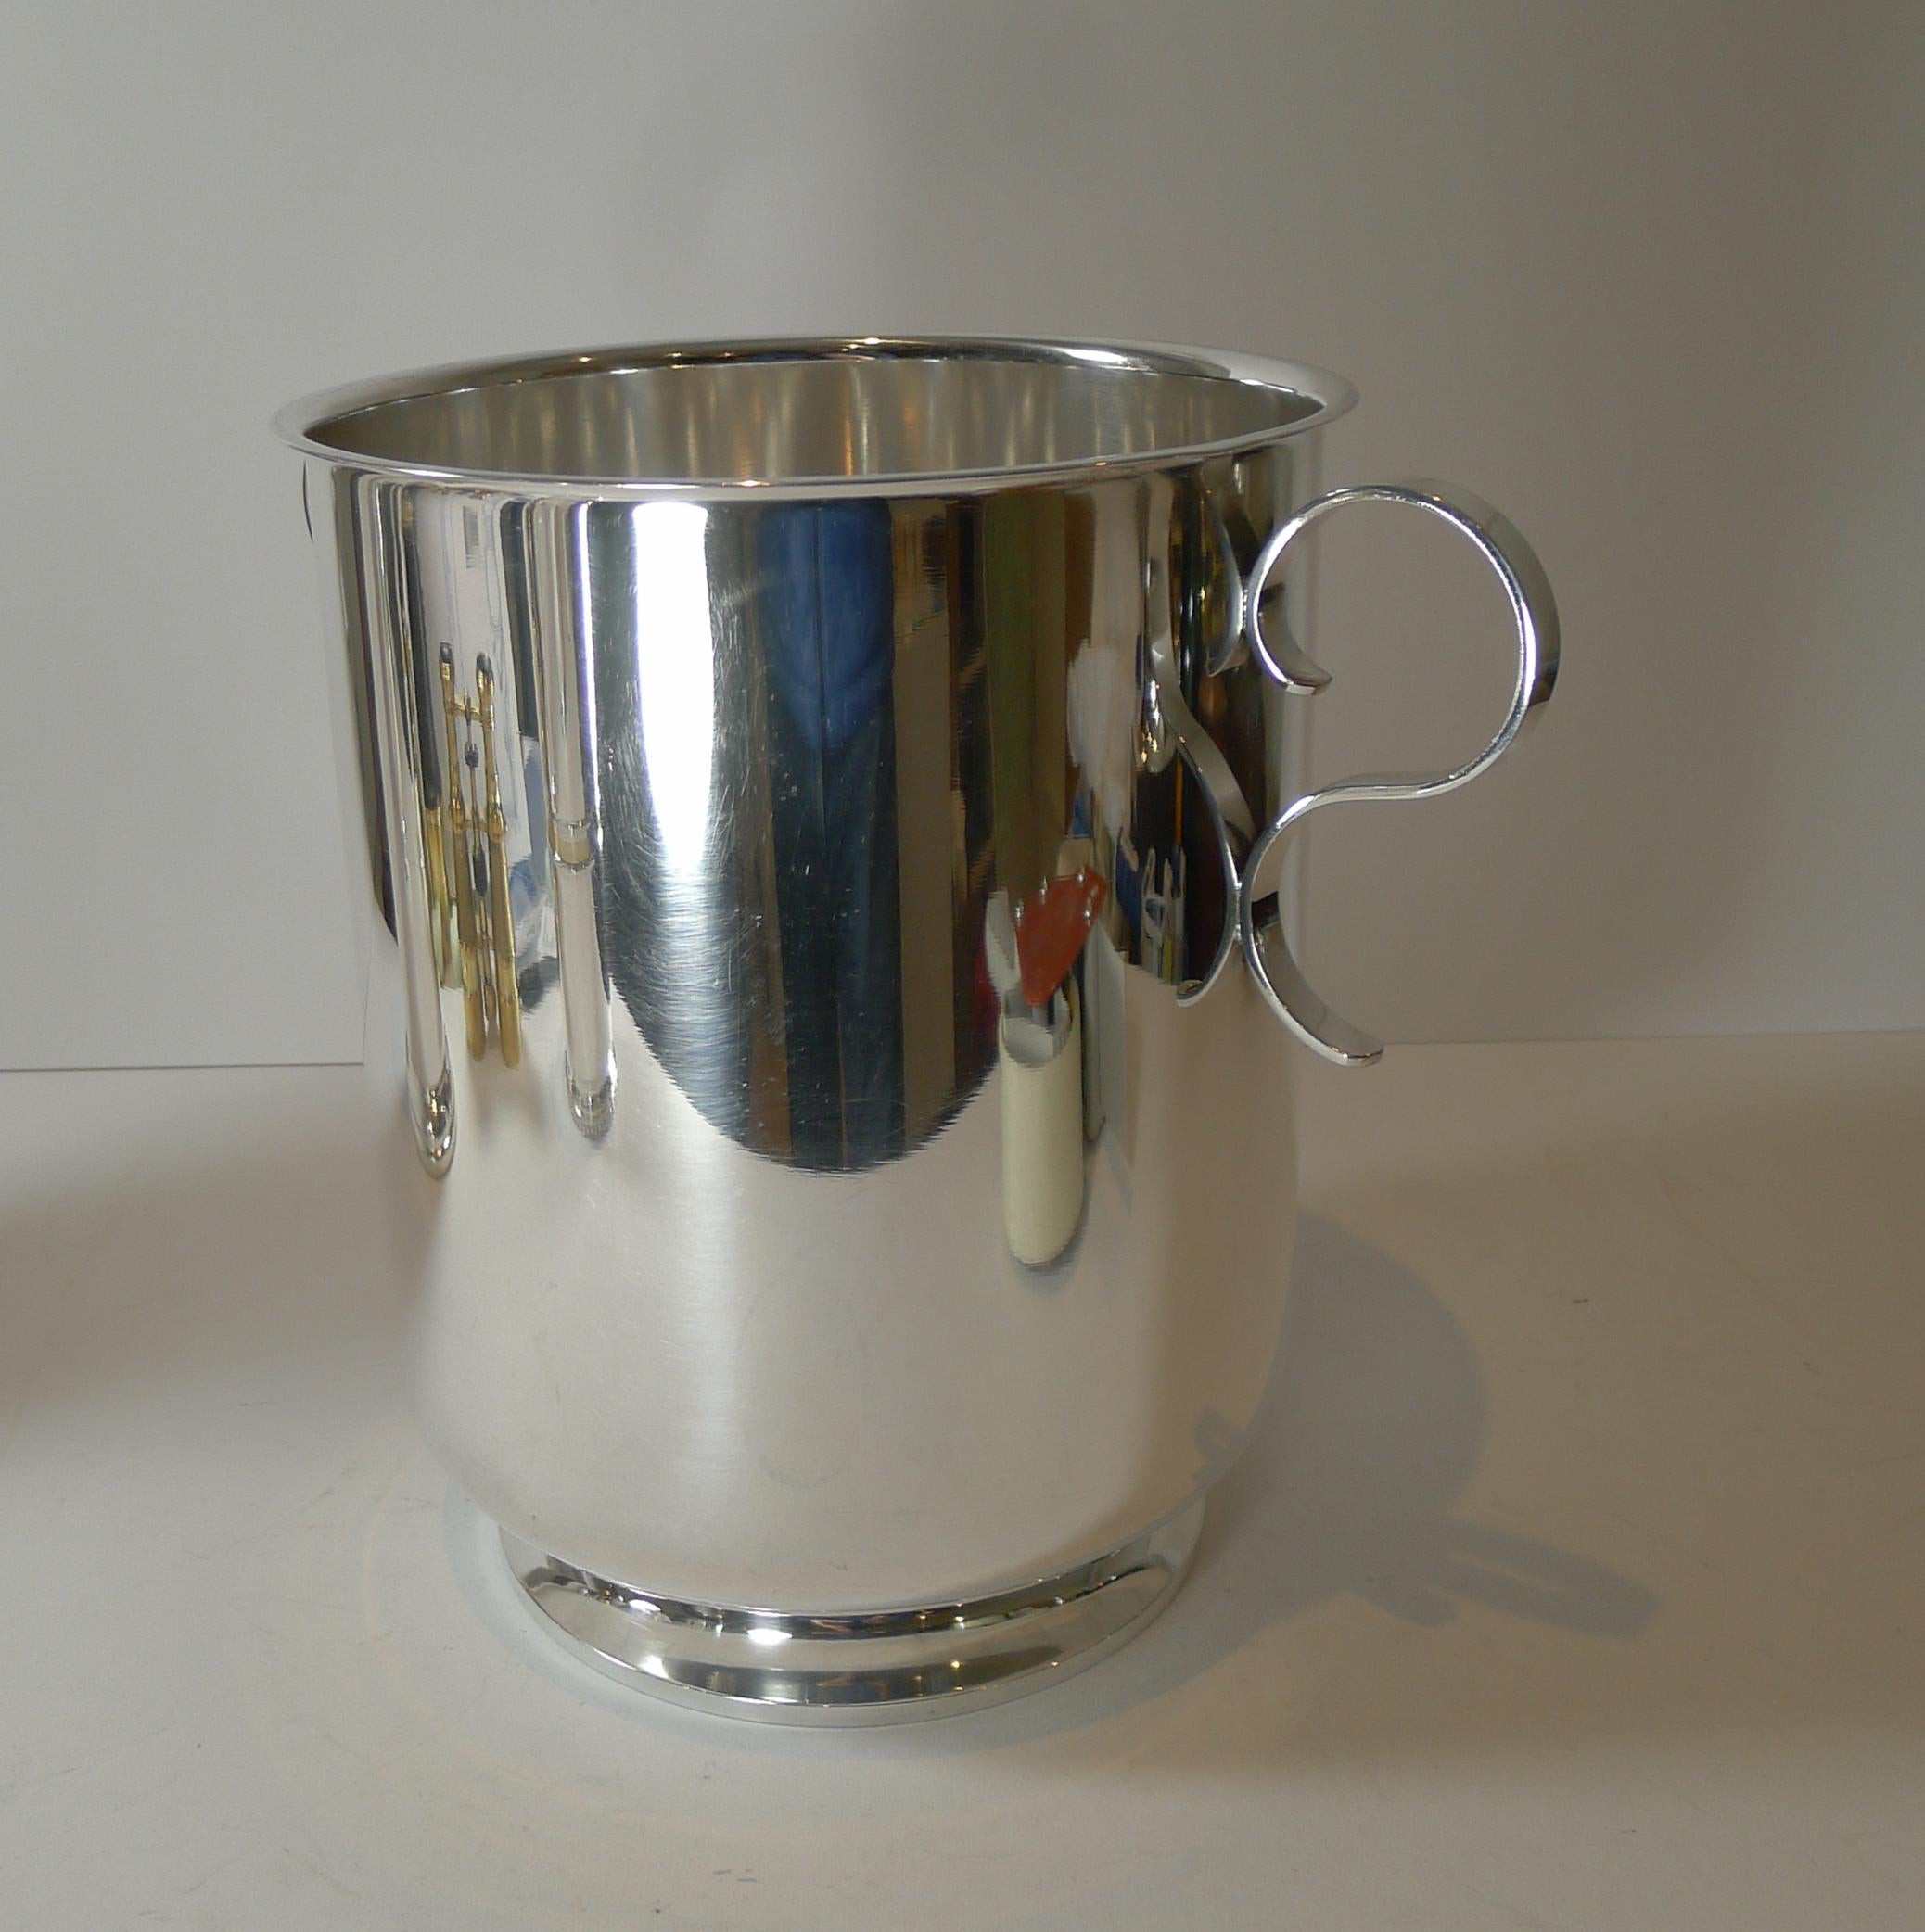 A rarely found model with it's footed base and two very elegant scroll handles, this silver plated champagne bucket was made by the top-notch Parisian silver and goldsmith's, Orfèvrerie Christofle as part of their highly collectable Gallia